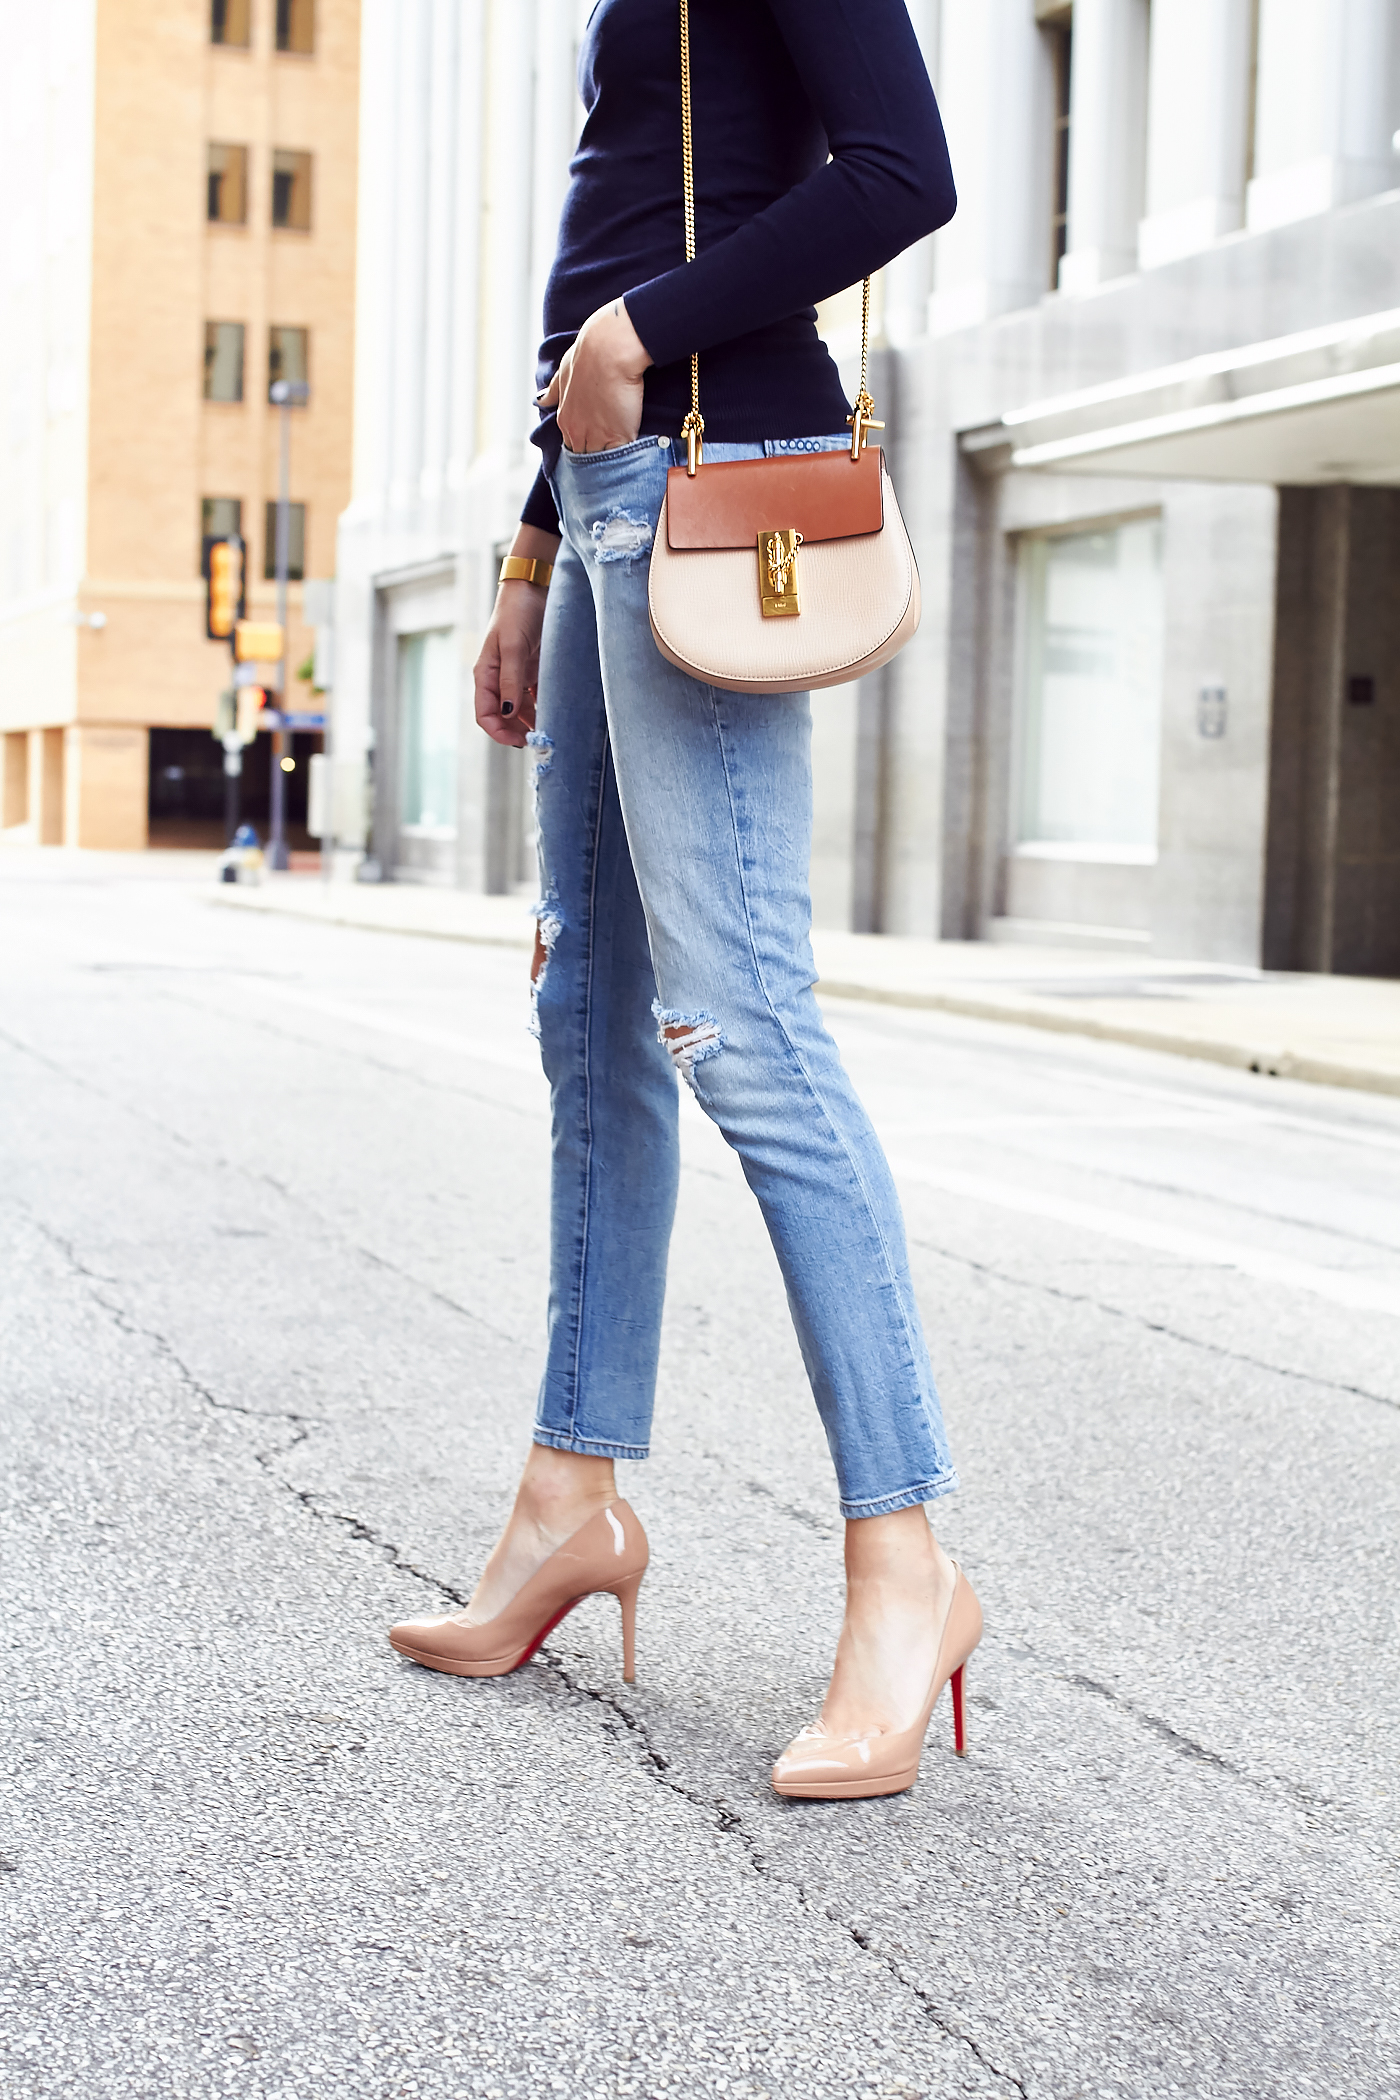 blanknyc denim jeans, christian louboutin pigalle nude pumps, autumn cashmere navy off the shoulder sweater, chloe drew handbag, fall outfit